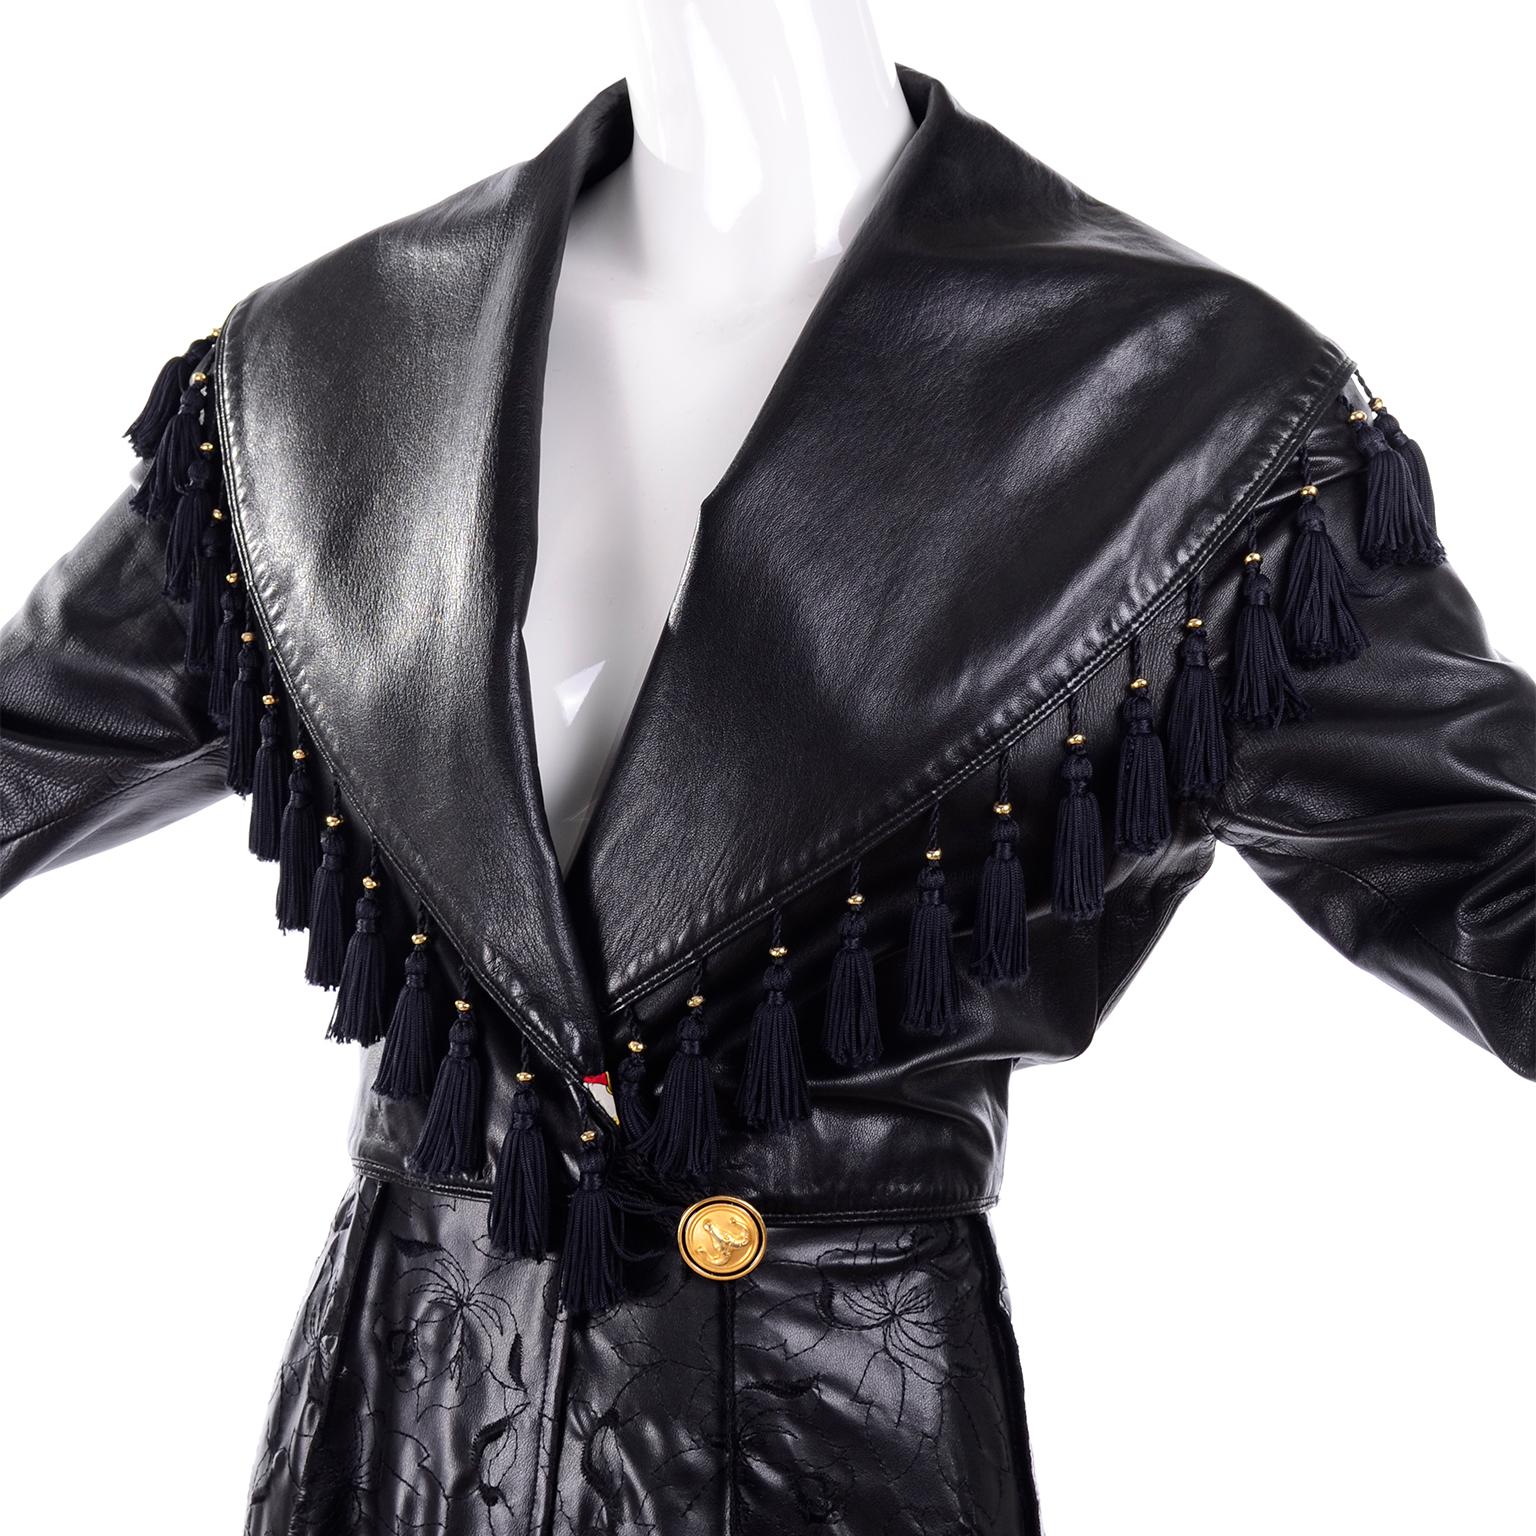 This is a very unique vintage Gianni Versace Coat in black leather with tassels. The coat closes with a ram's head button on the outside and gold medusa head button on inside. The bottom portion of the coat is embroidered leather with reverse seams